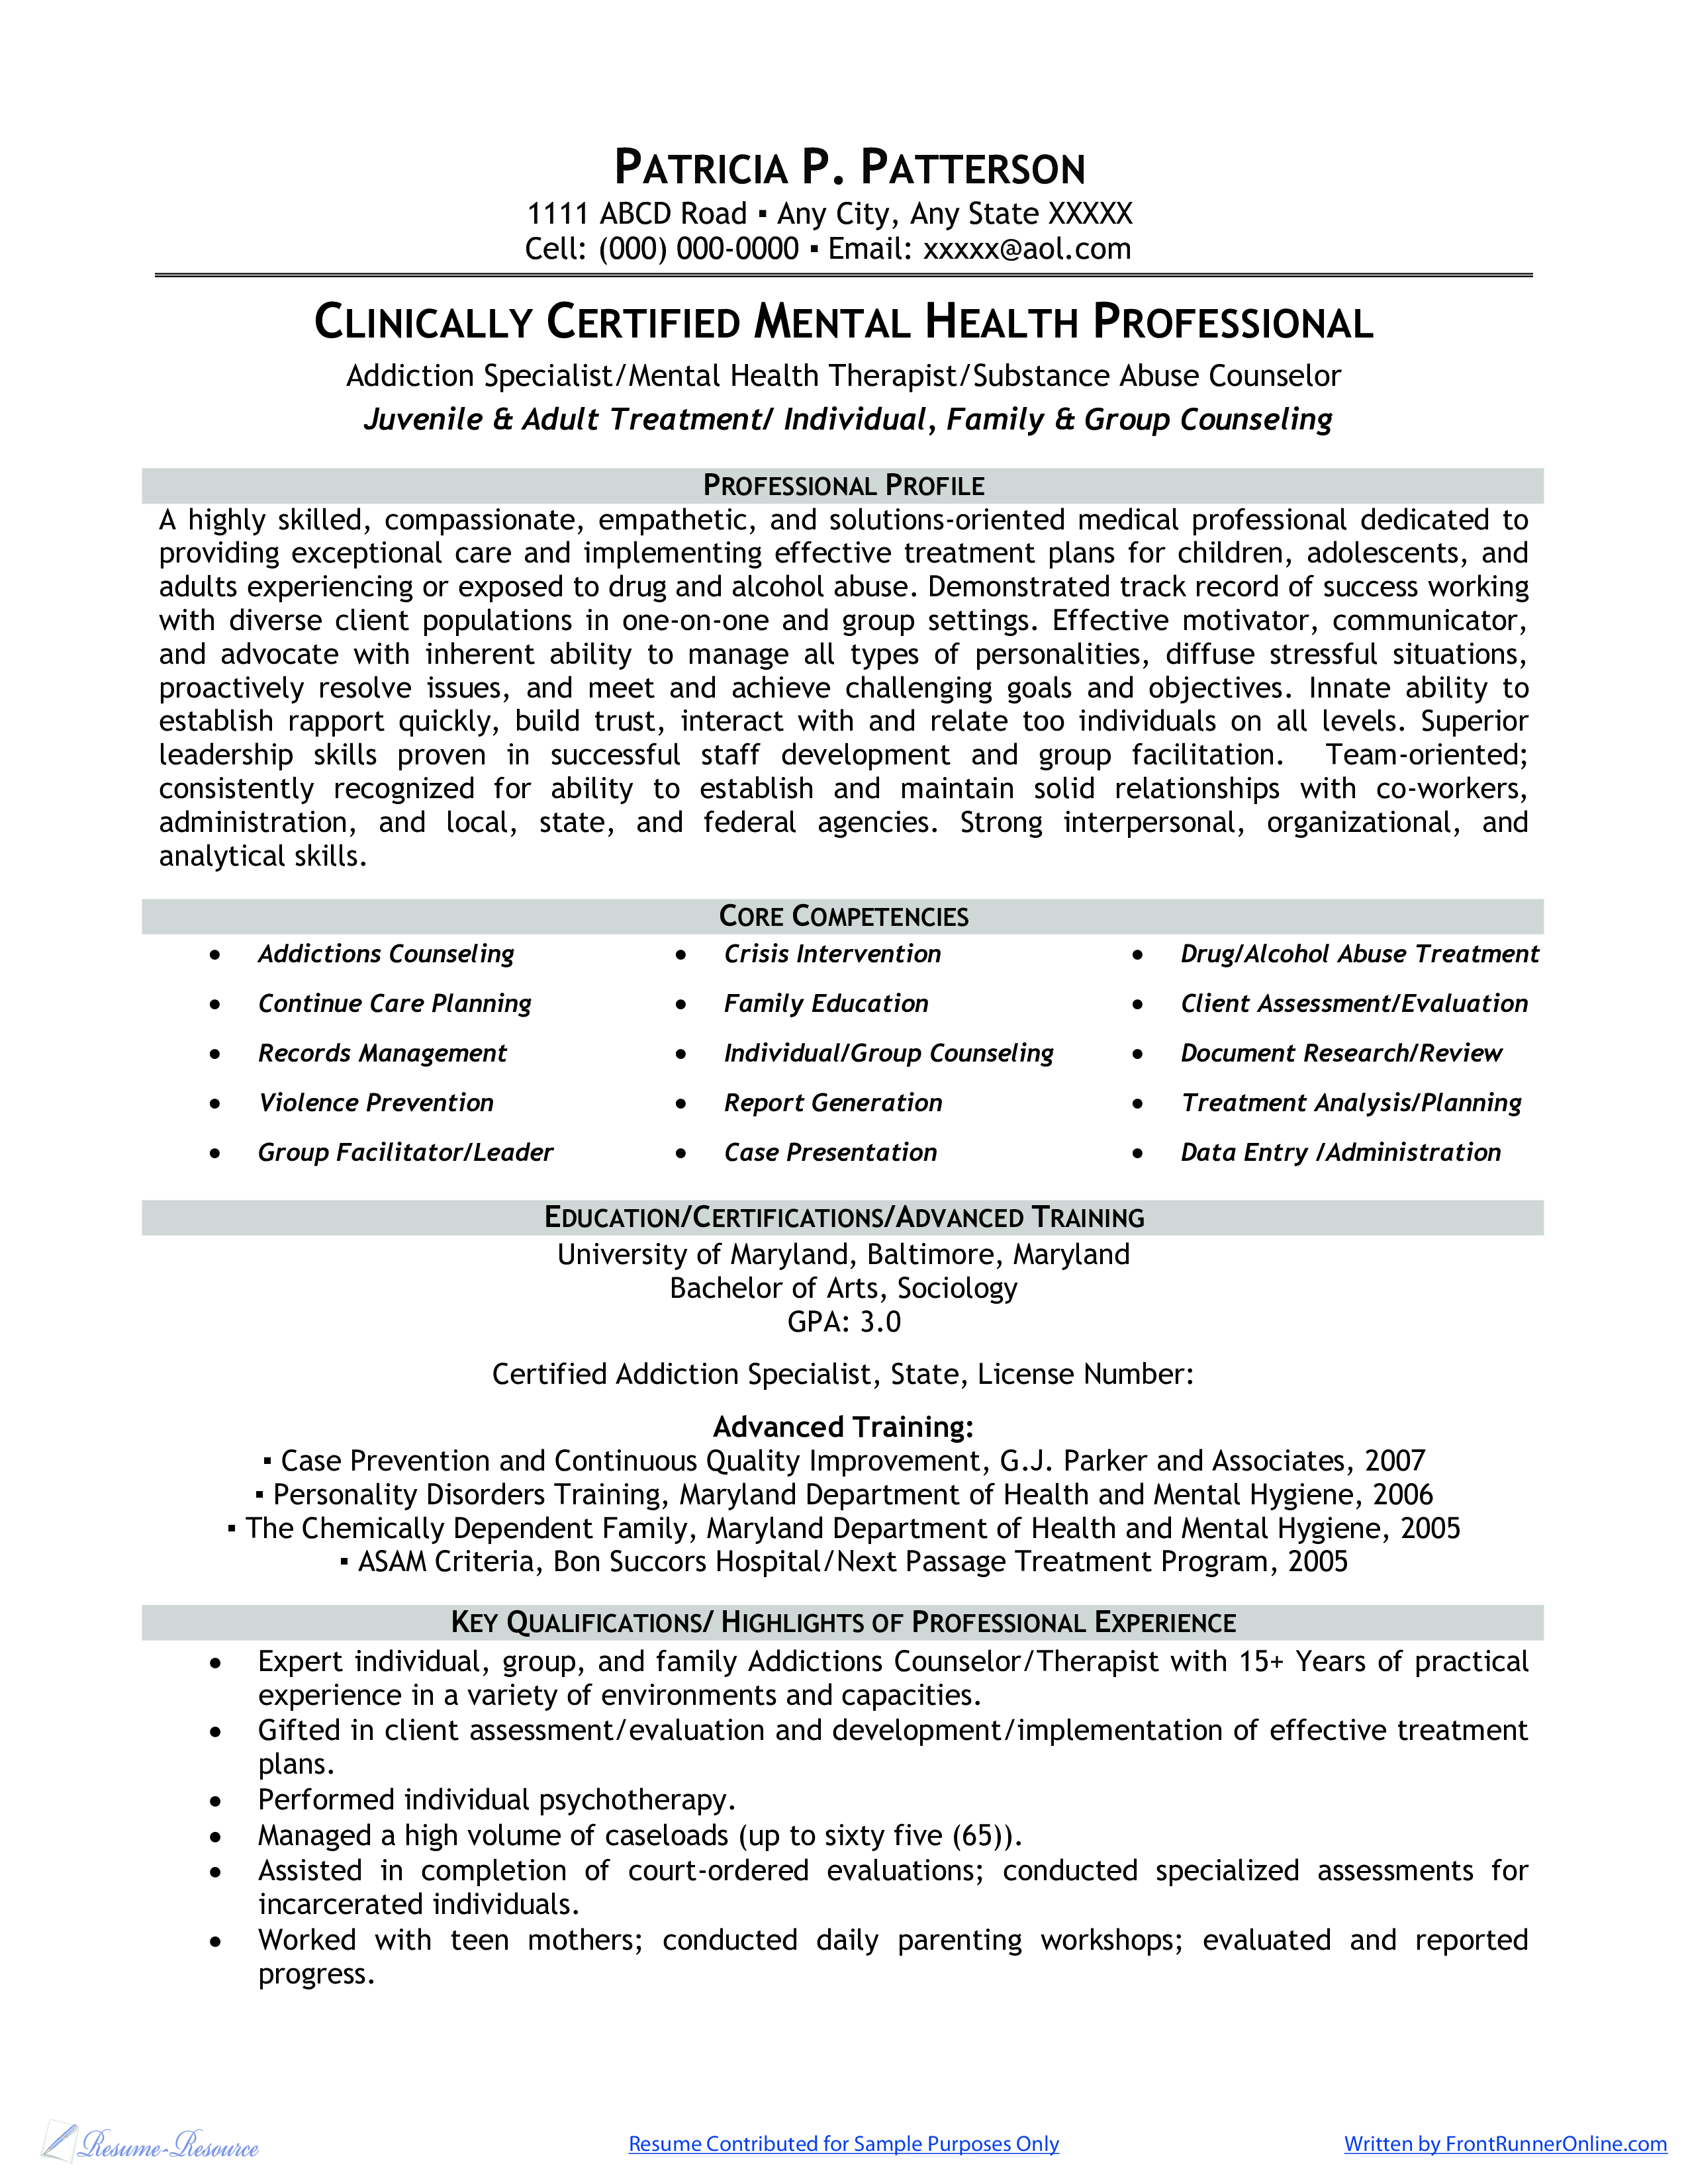 Free Clinically Certified Mental Health Professional Resume Templates